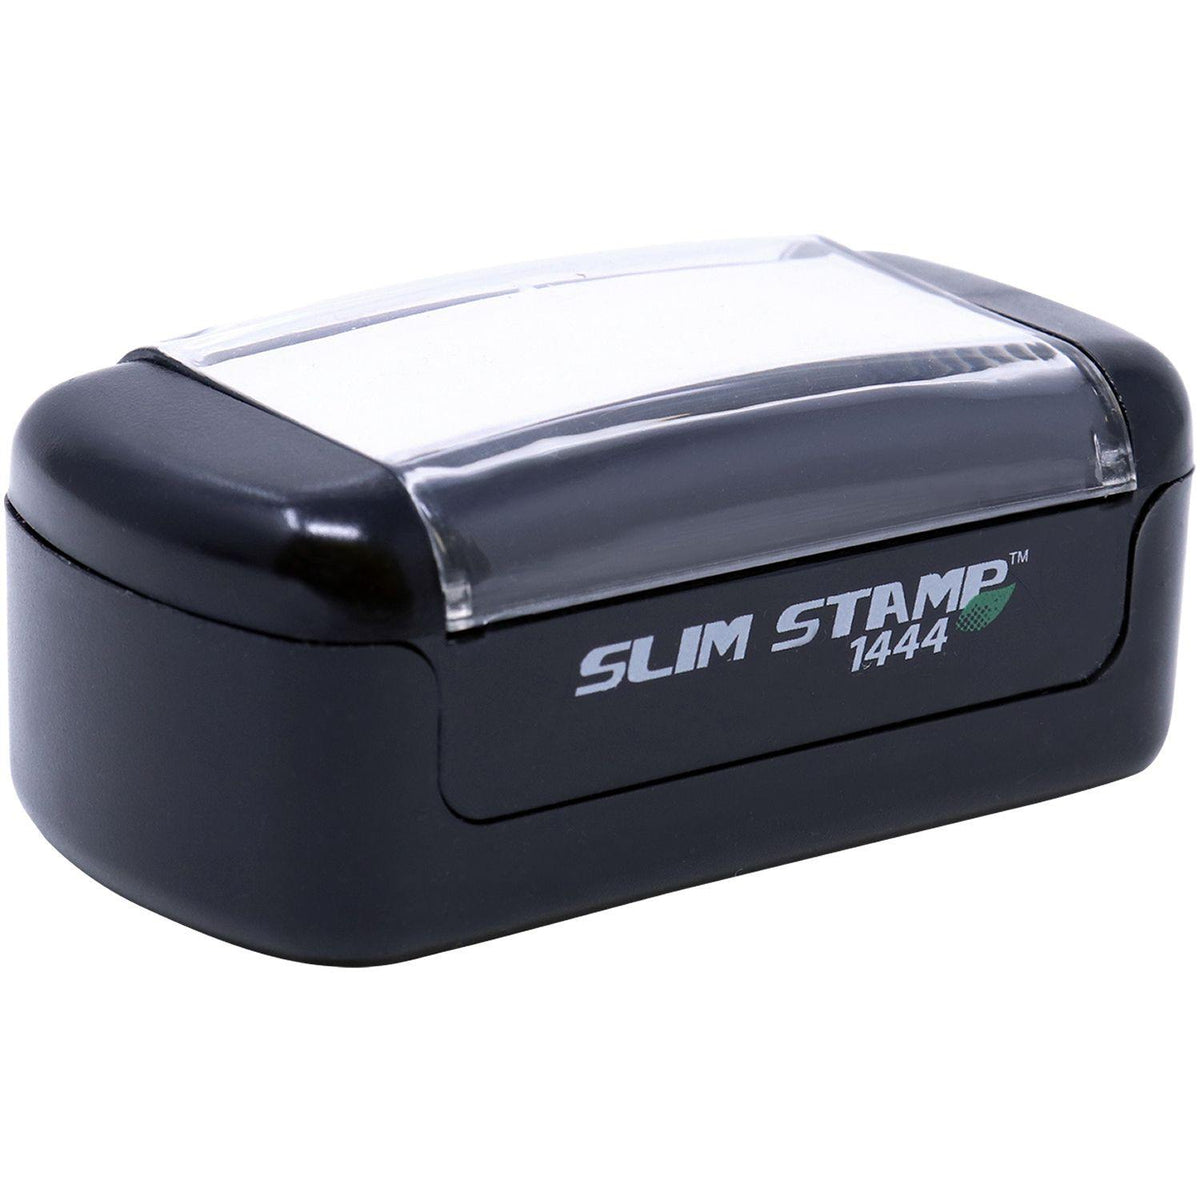 Alt View of Slim Pre-Inked Stop Covid Patient Stamp Mount Angle